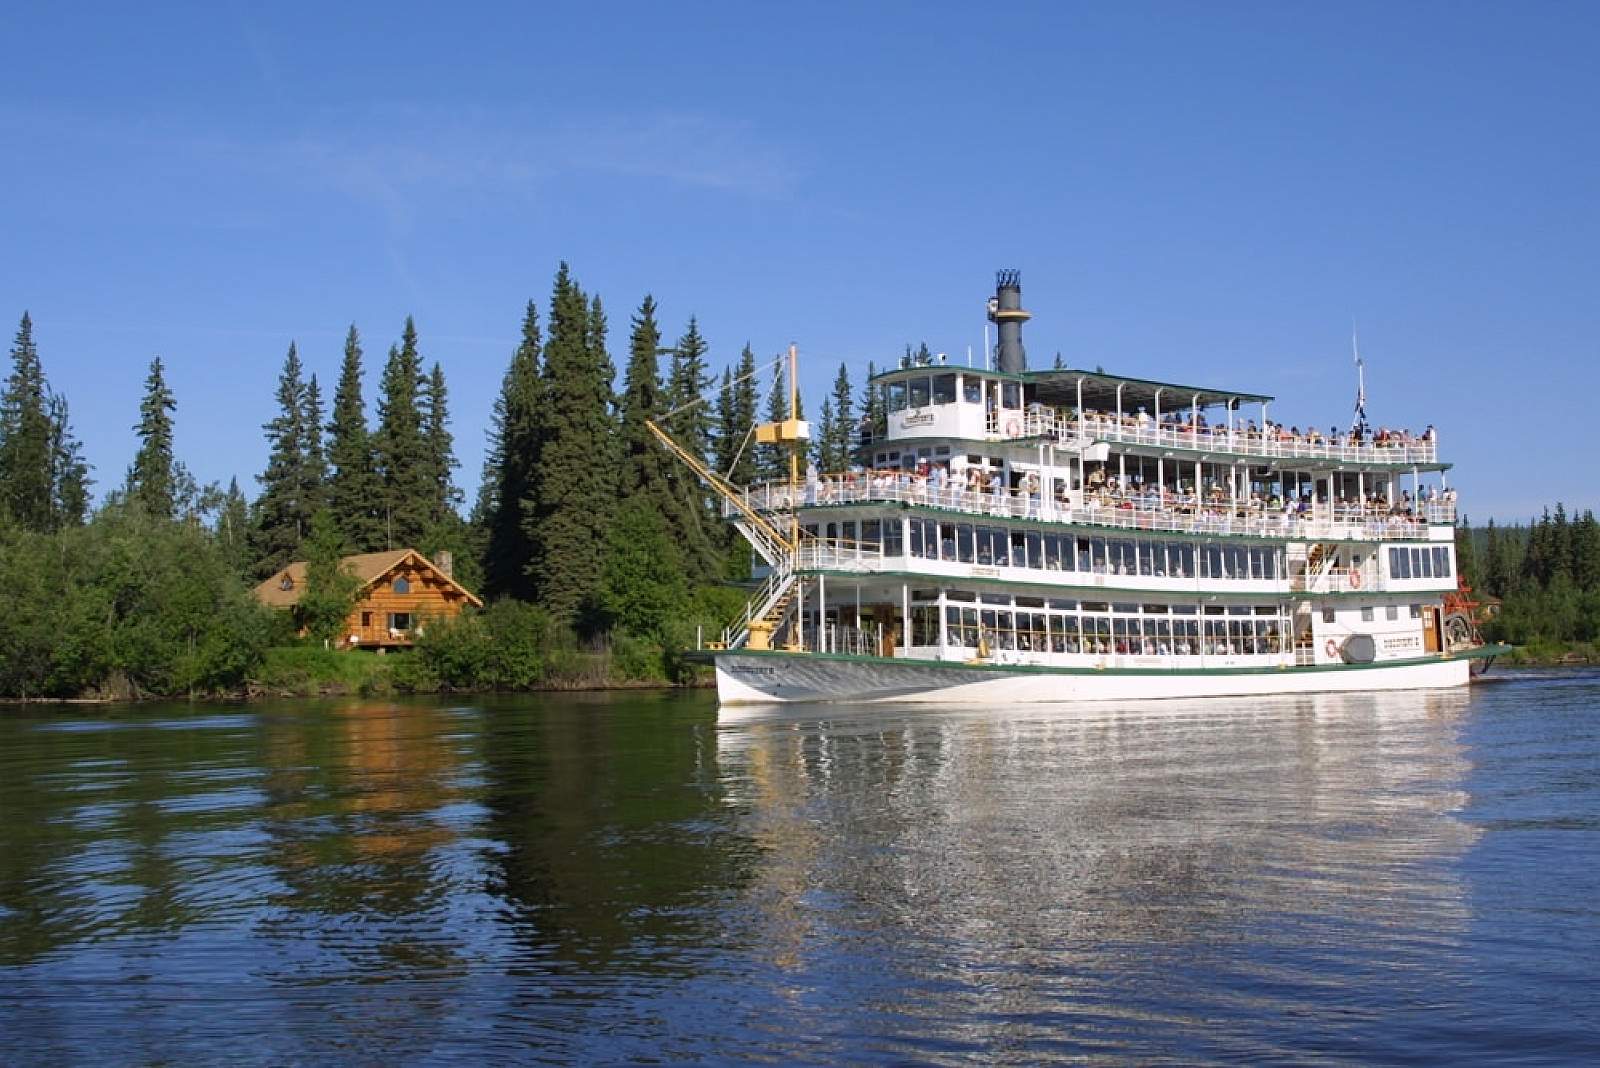 sternwheeler riverboat discovery cruise